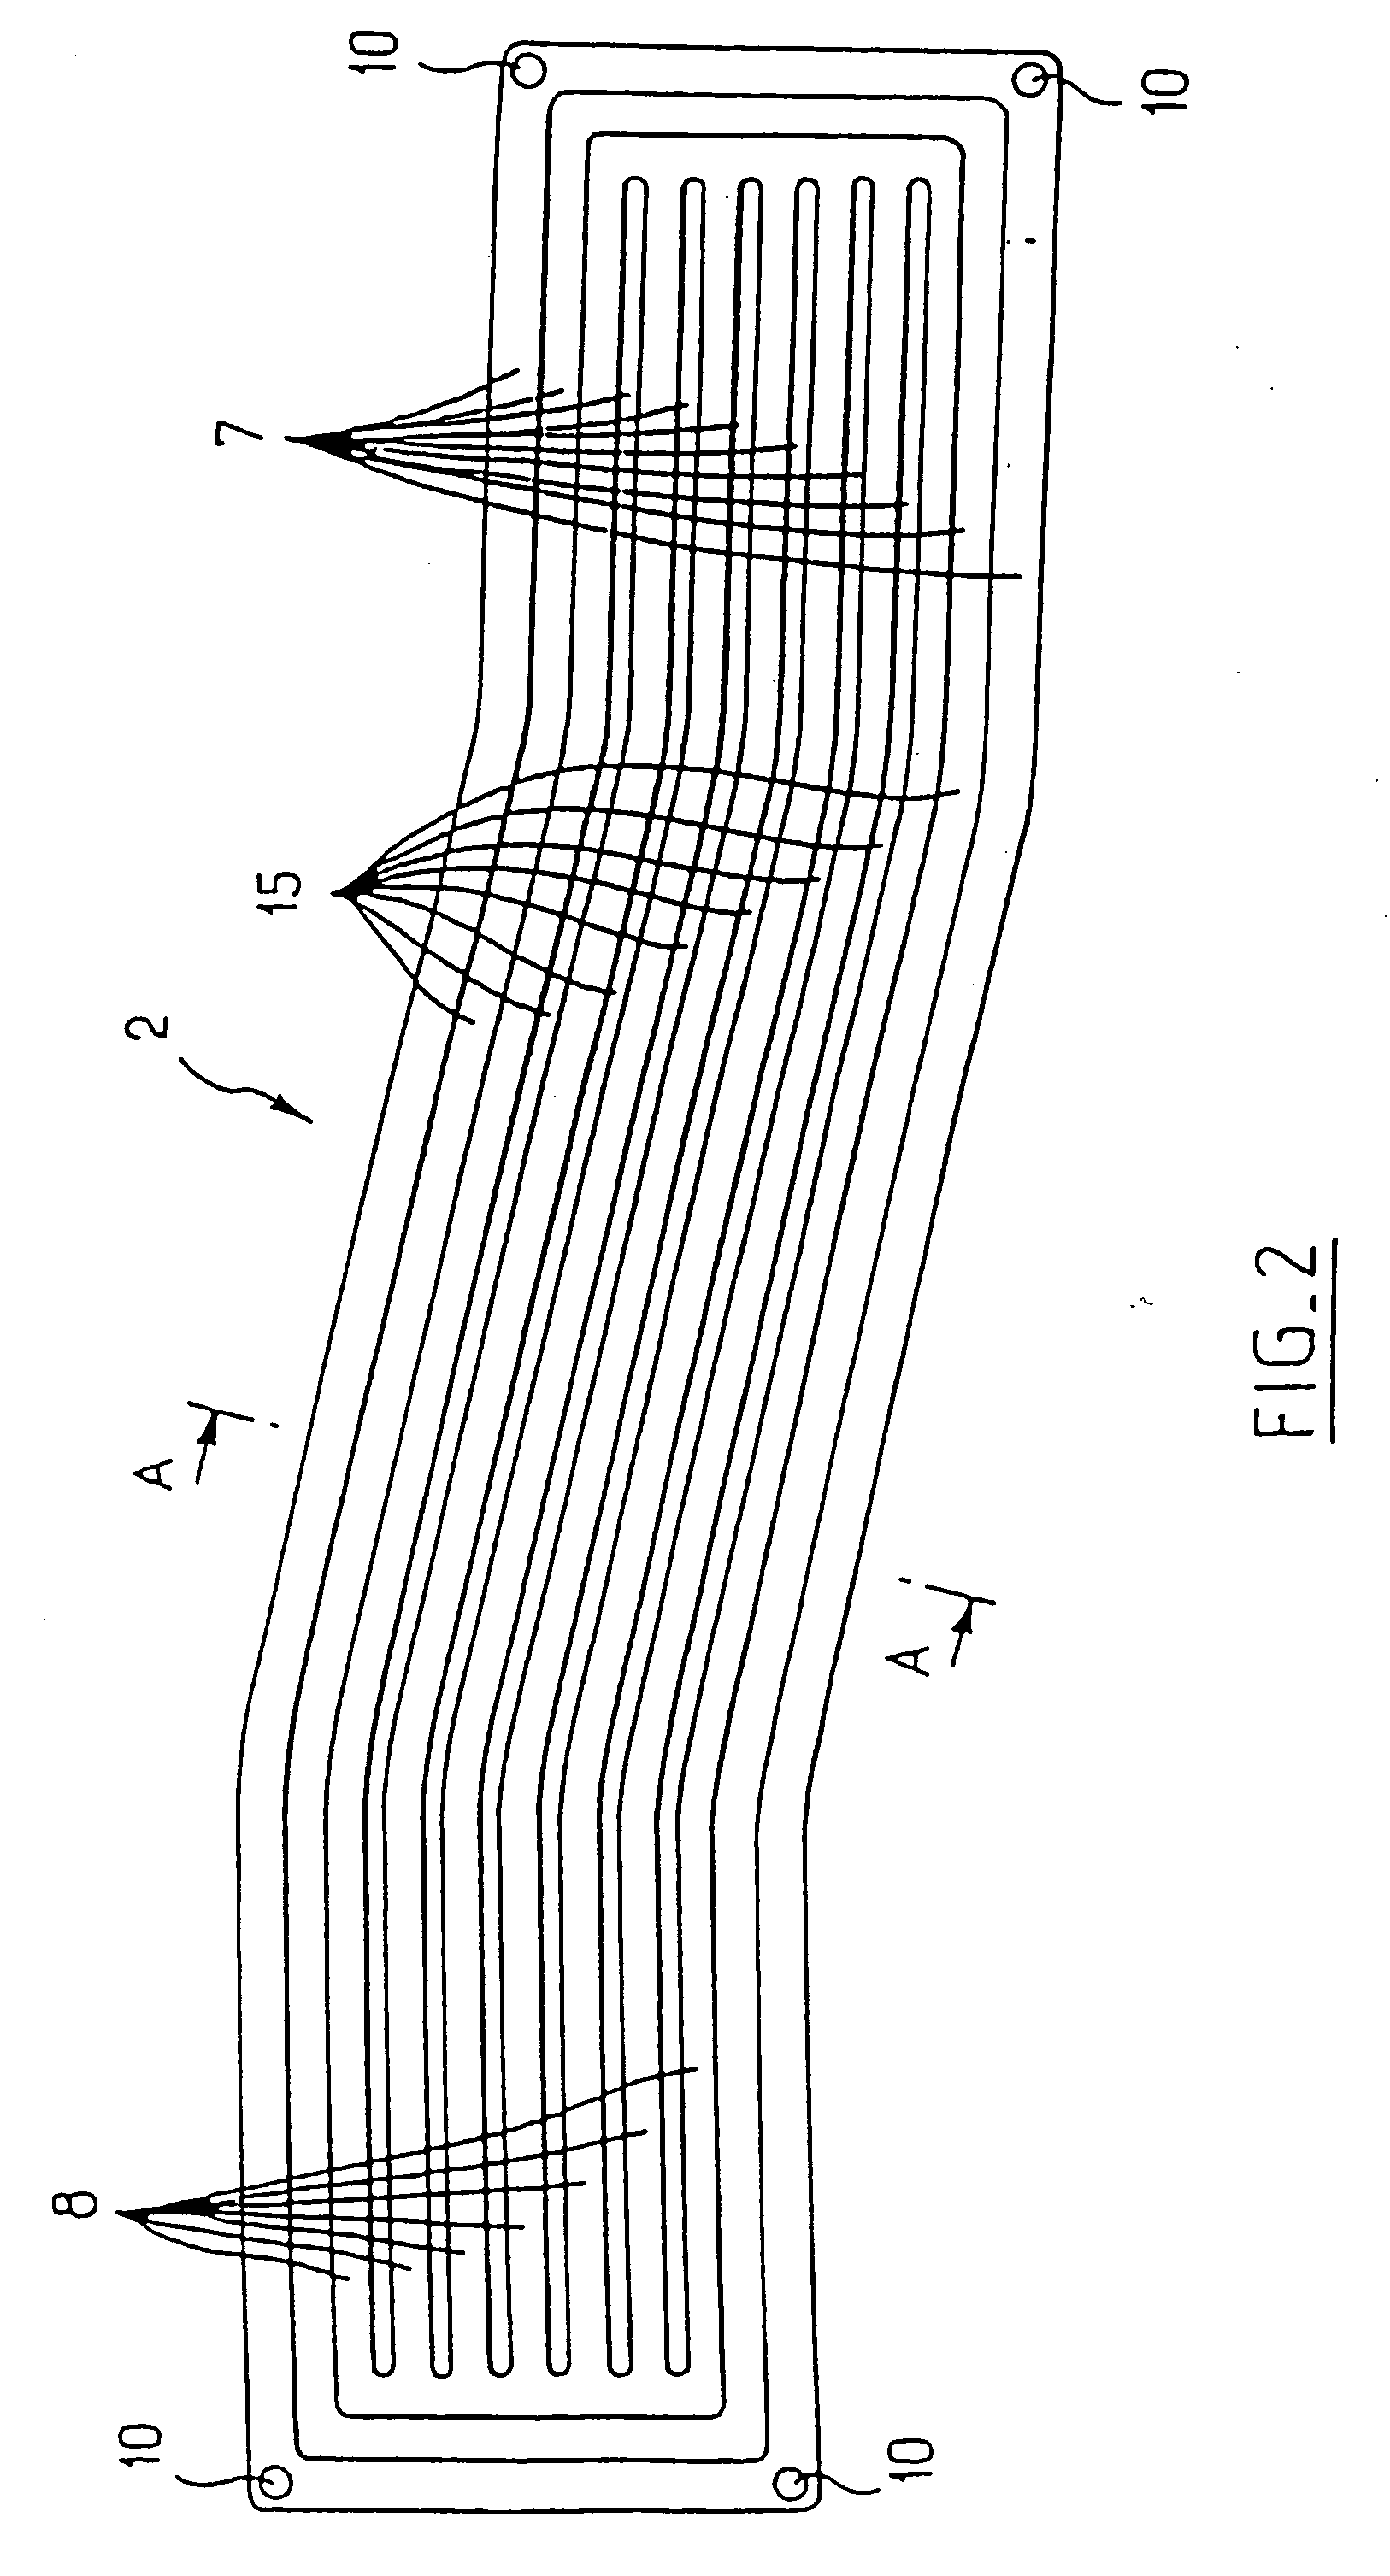 Heat exchanger device using a two-phase active fluid, and a method of manufacturing such a device